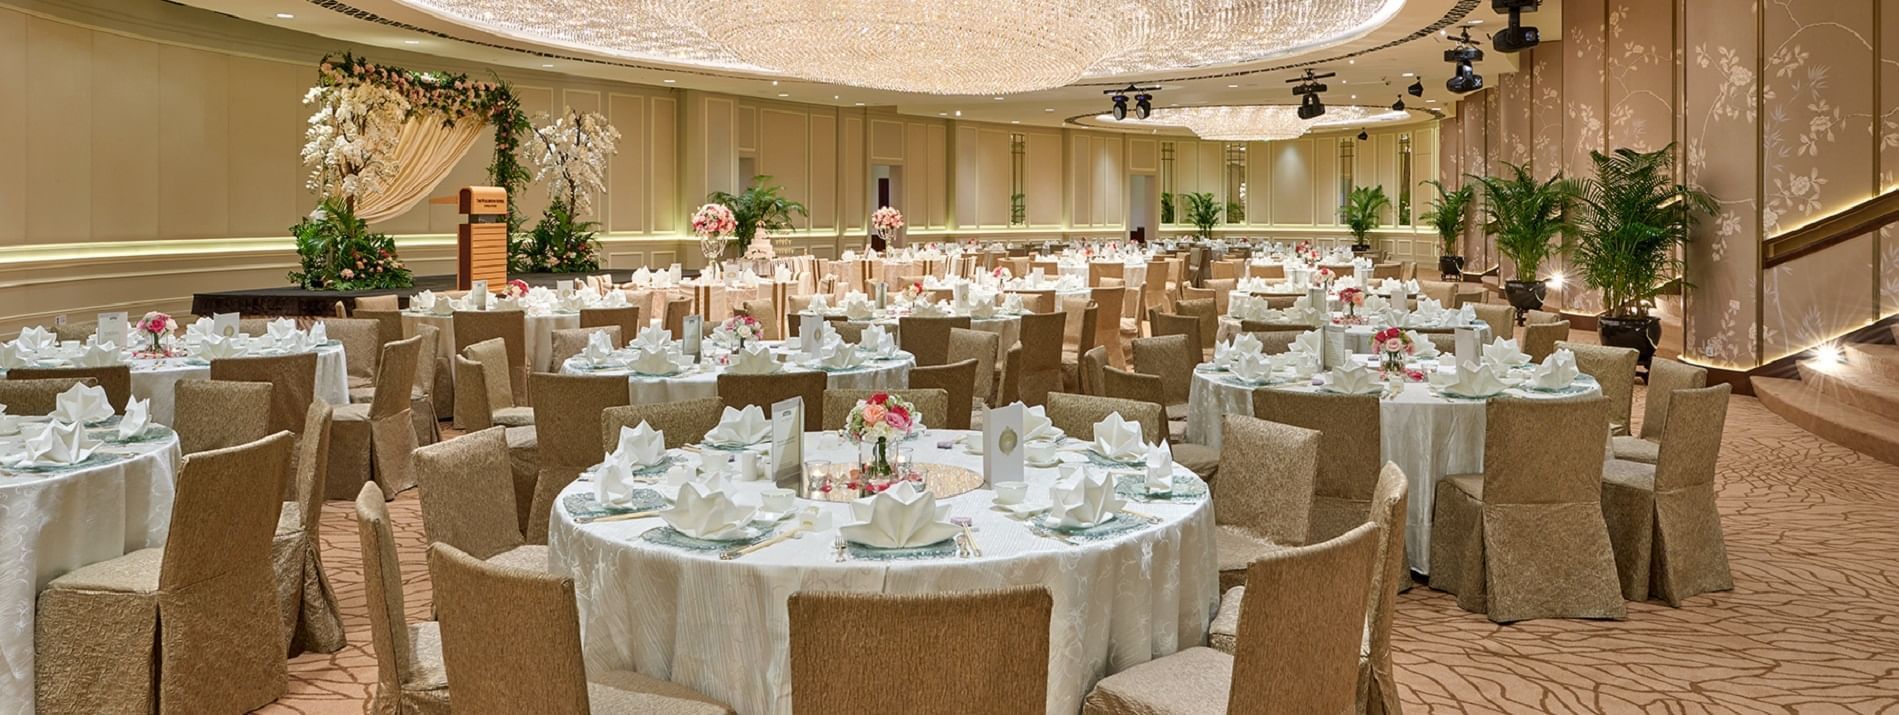 The arranged Ballroom with white tables at Fullerton Group